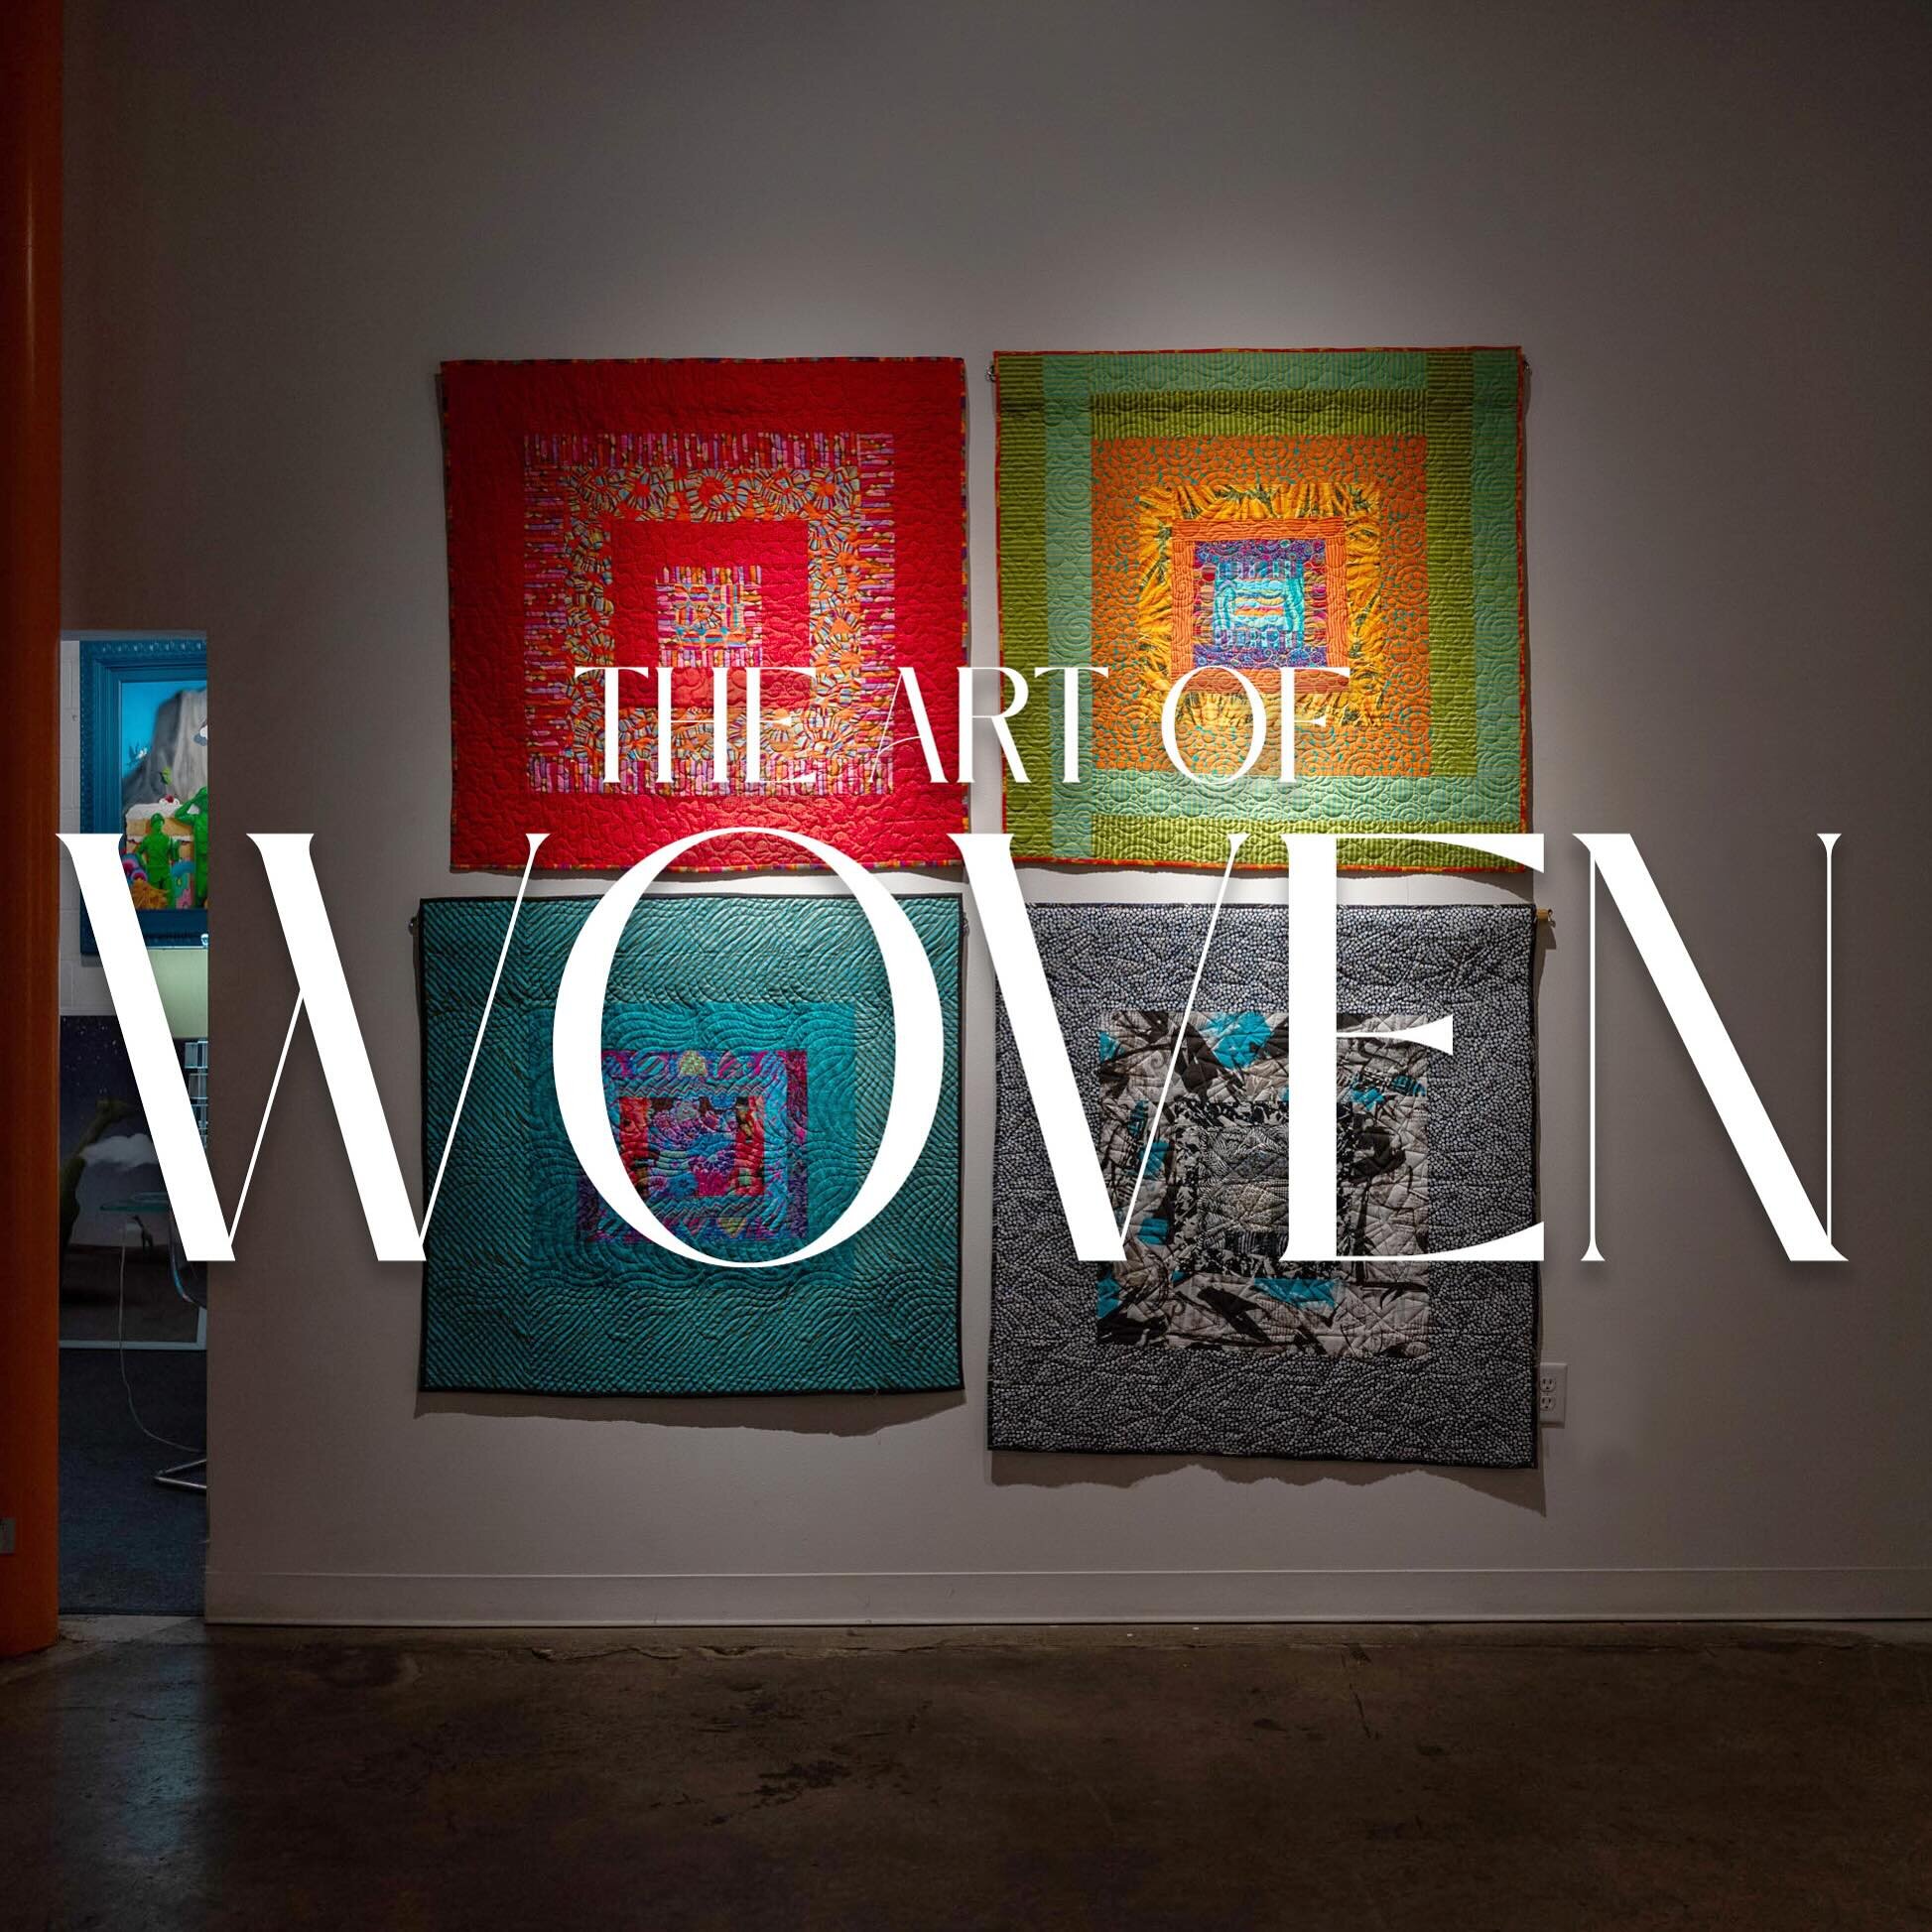 Dear Friends, 

We are pleased to share with you The Art of WOVEN featuring all new works by Sandy Teepen, Chloe Alexander, Philip Carpenter, Marc Boyson, and Lauren Lesley. Thank you to Valentin Sivyakov Photography for the awesome shots:

https://w